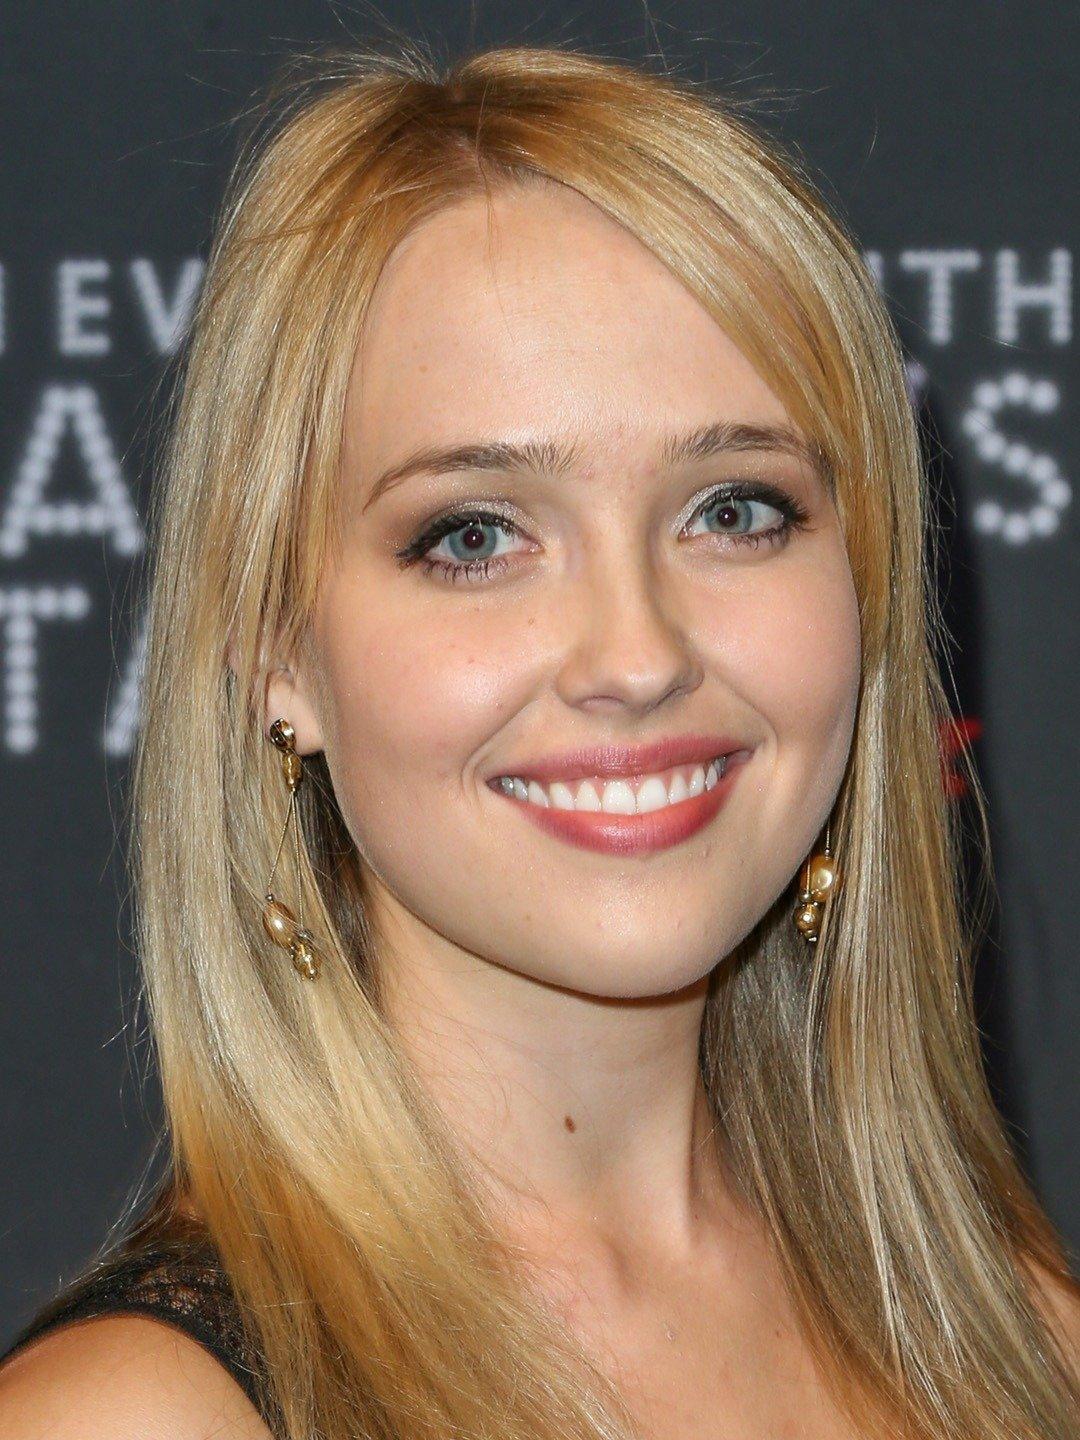 Siobhan williams movies and tv shows